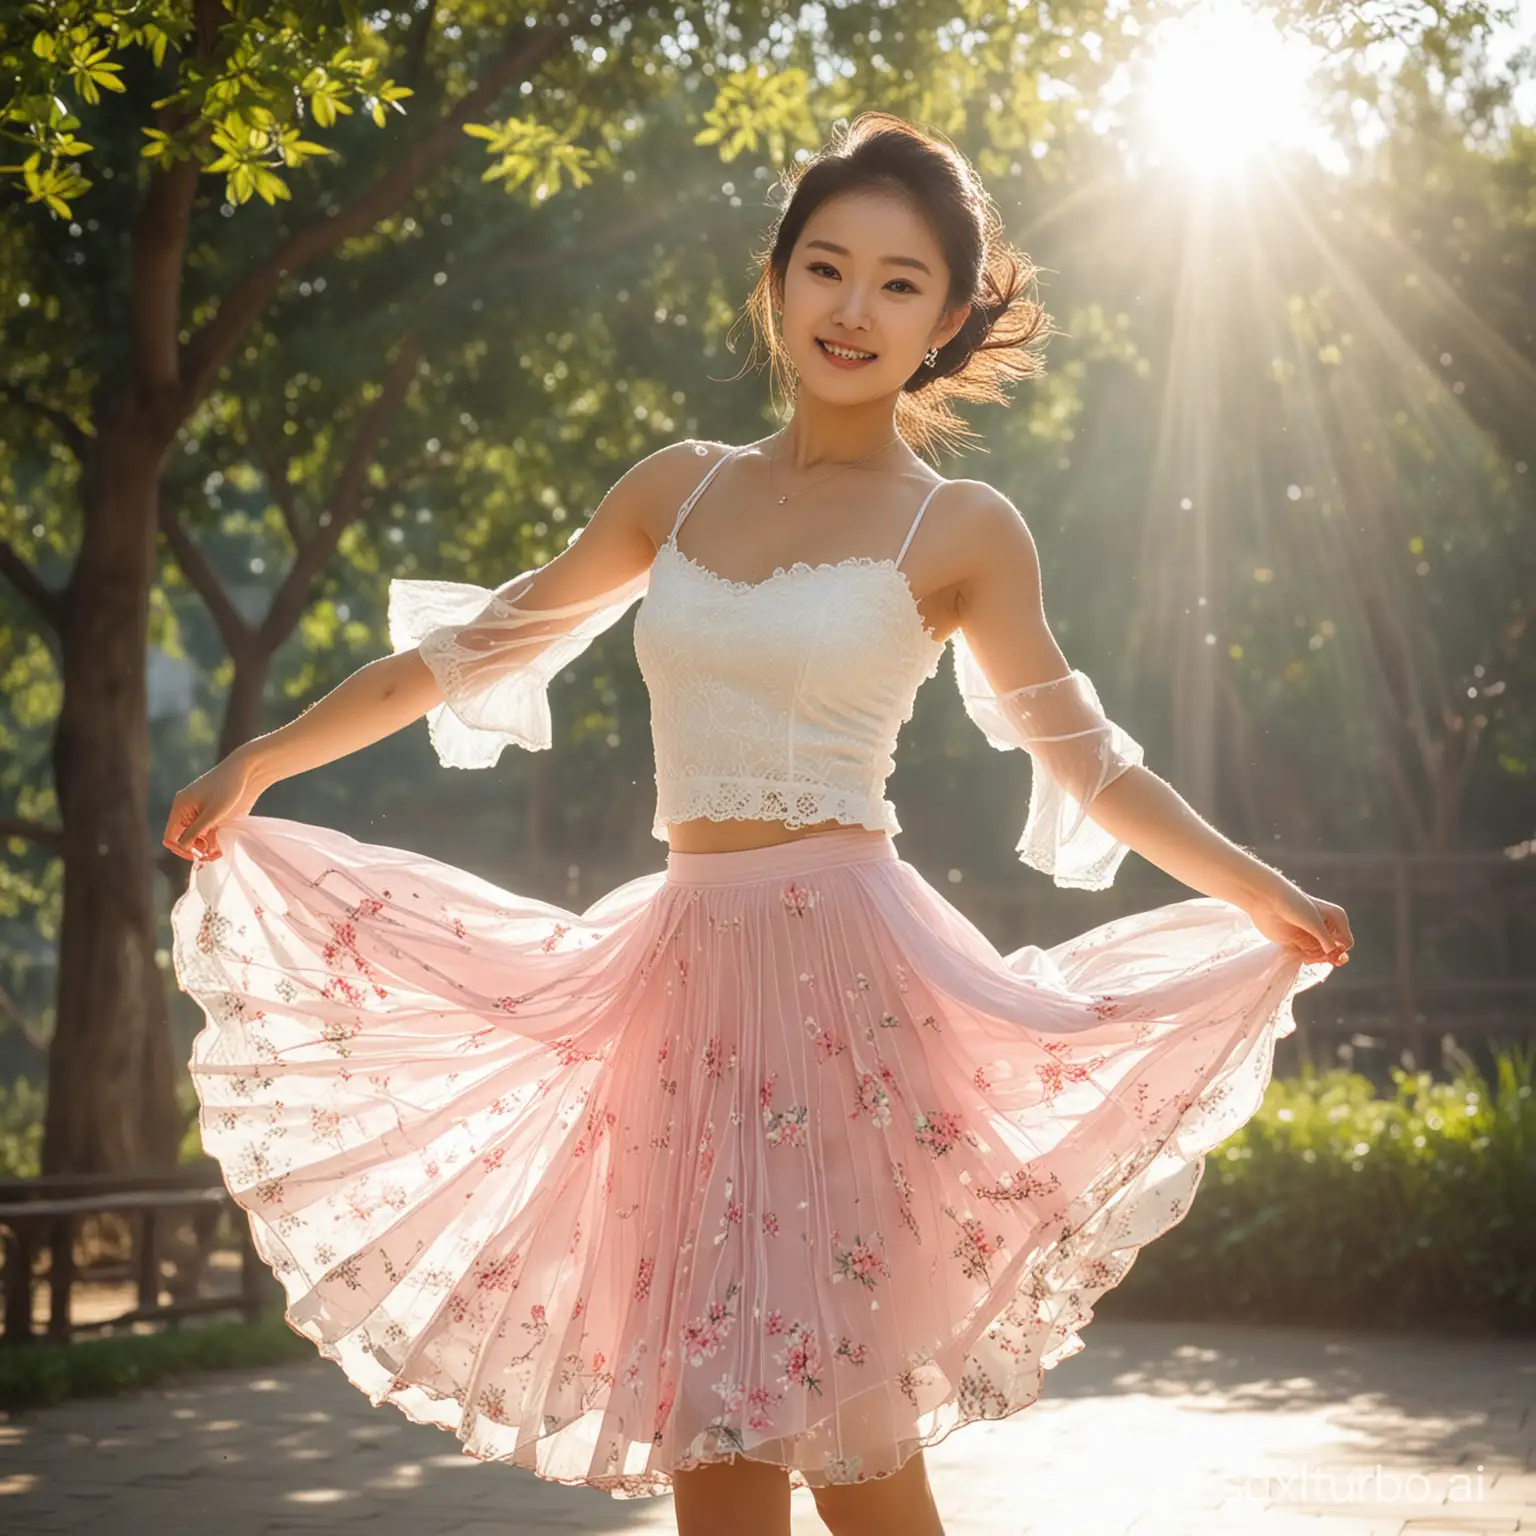 A beautiful Chinese girl dancing in a skirt, outdoors, sunshine